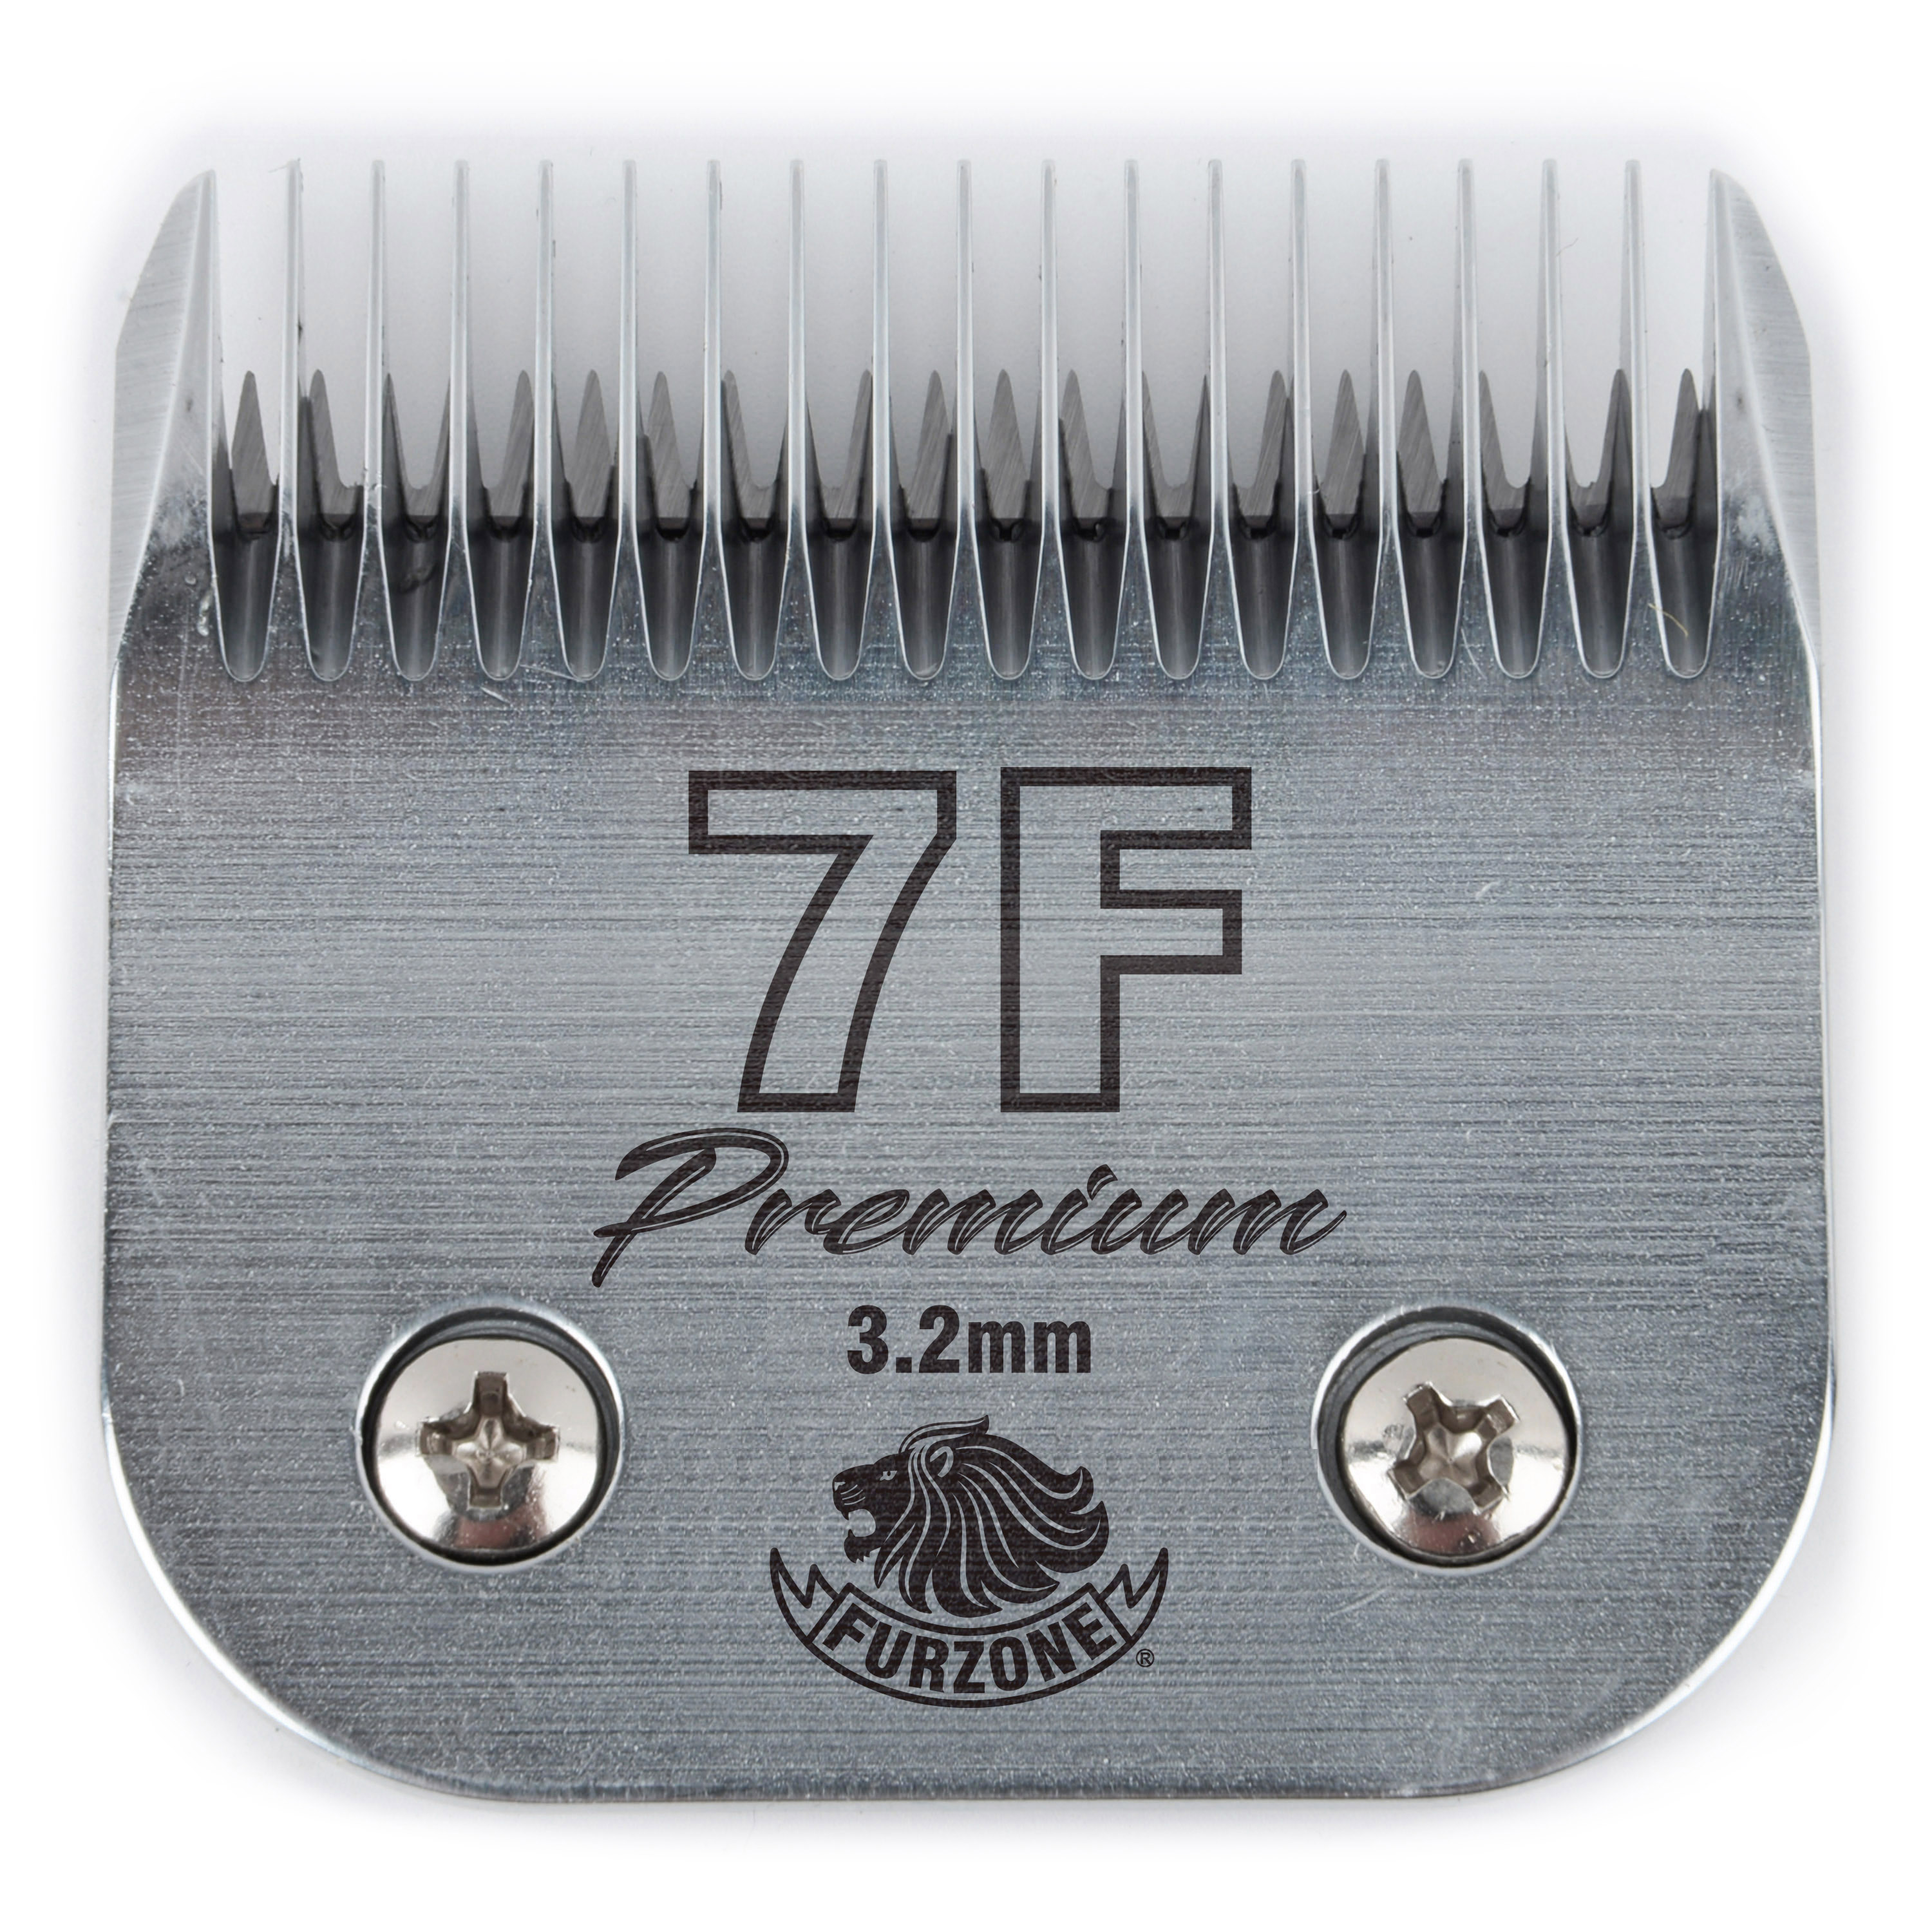 Furzone #7F-3.2mm-Full Teeth Professional A5 Detachable Blade - Made Of Extra Durable Japanese Steel